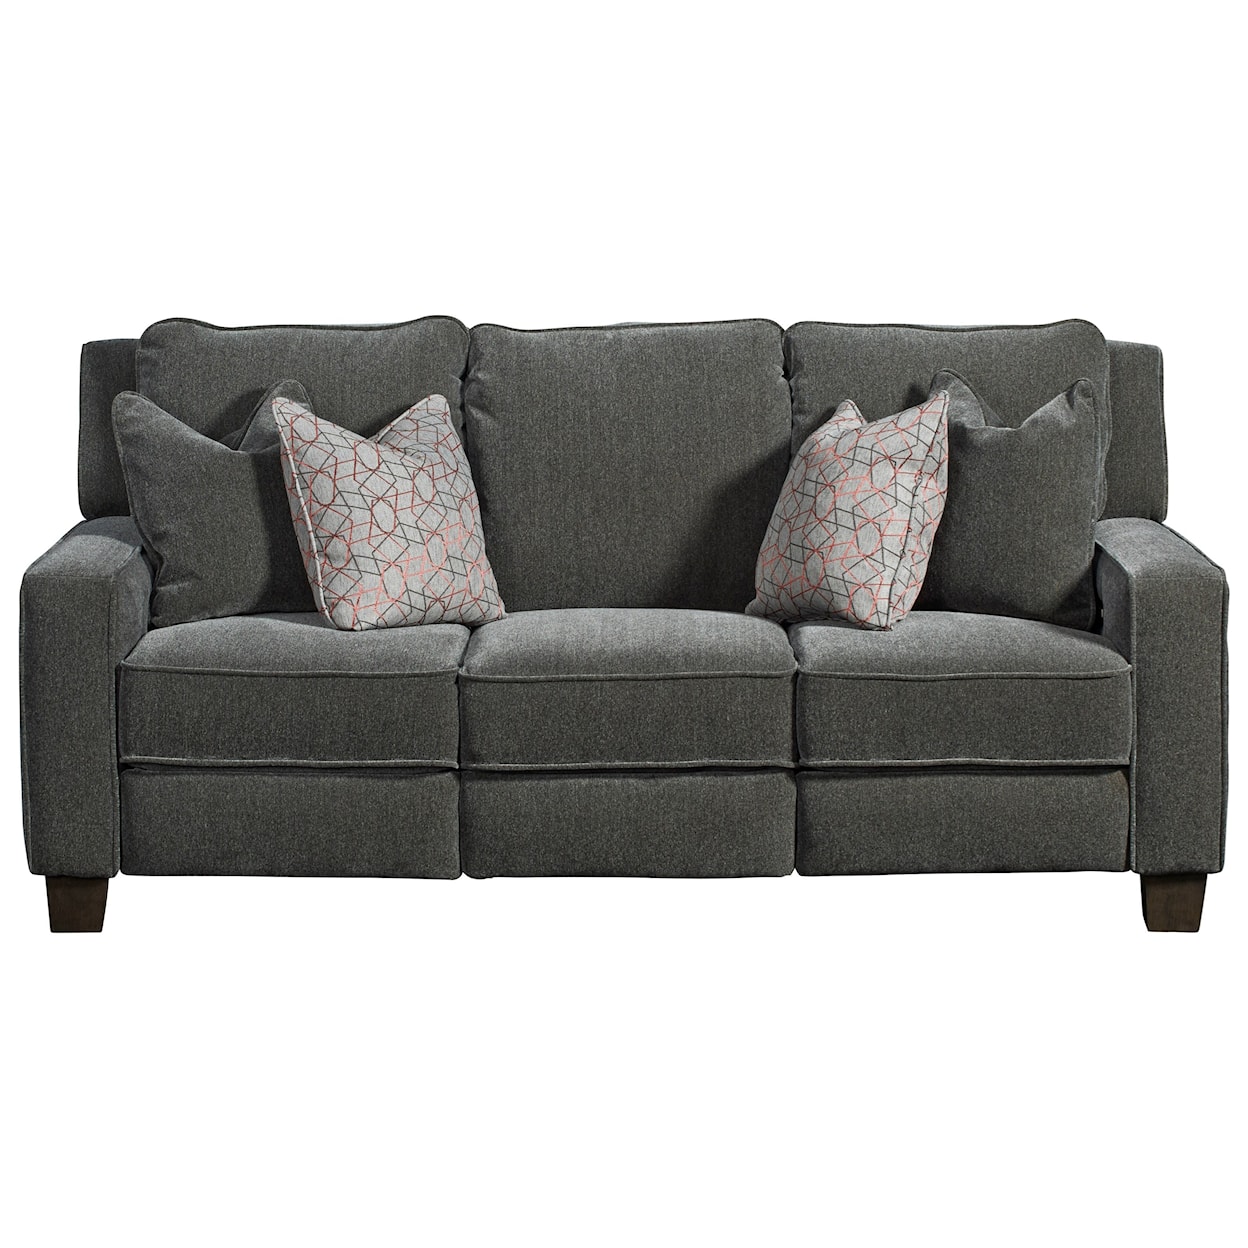 Southern Motion West End Double Reclining Power Sofa with Pillows